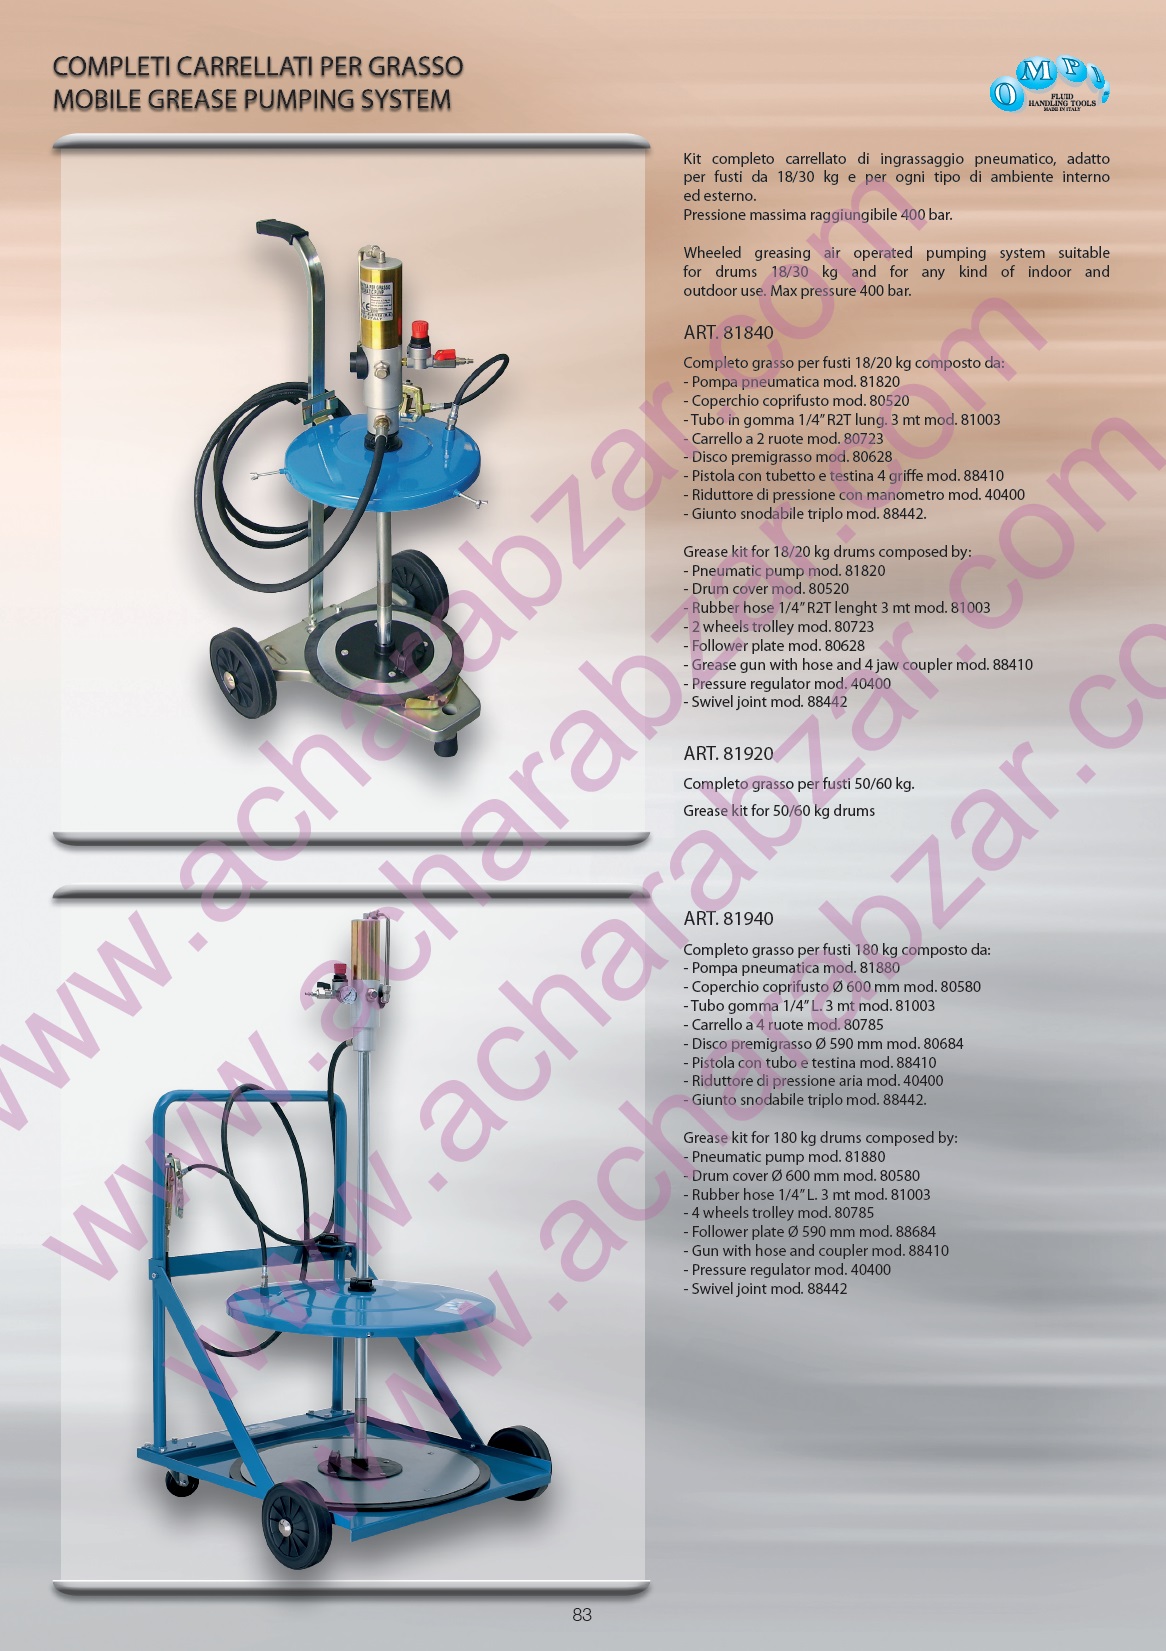 MOBILE GREASE PUMPING SYSTEM